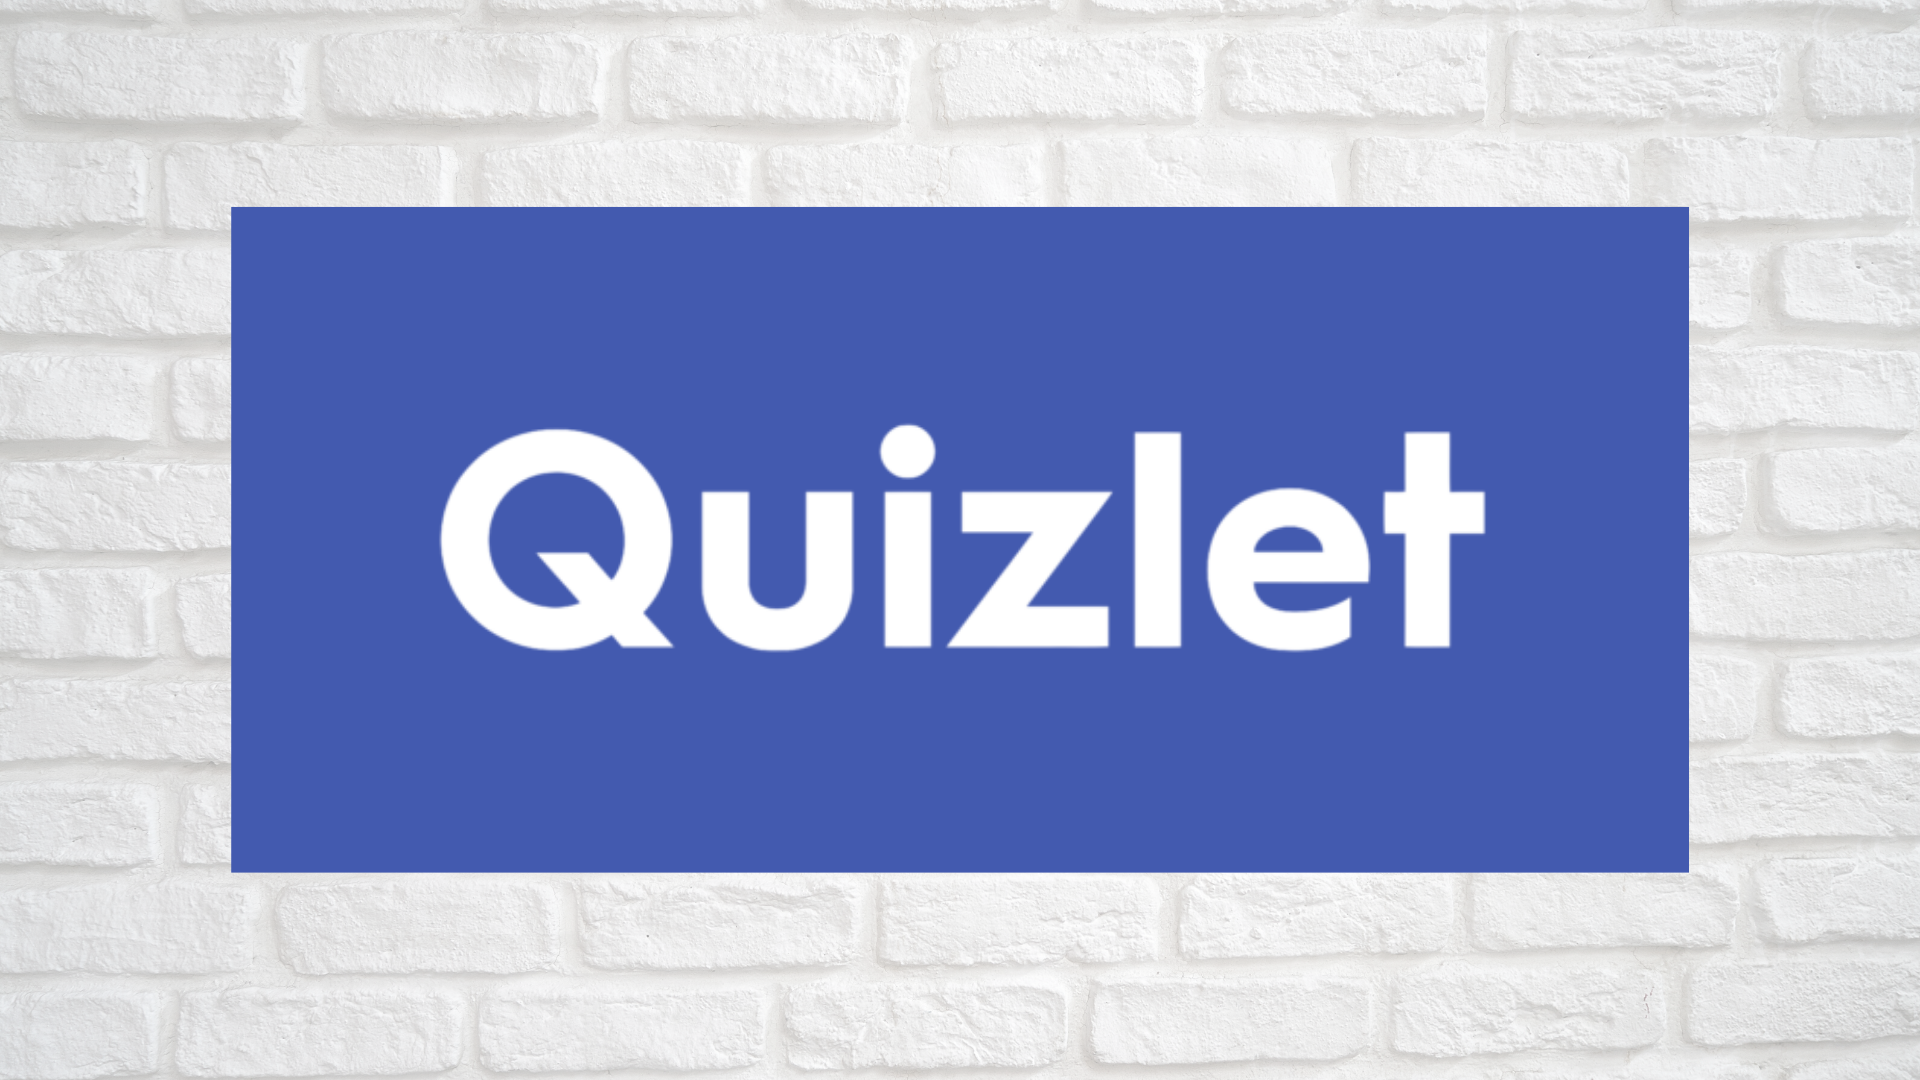 How to Change Your Name in Quizlet